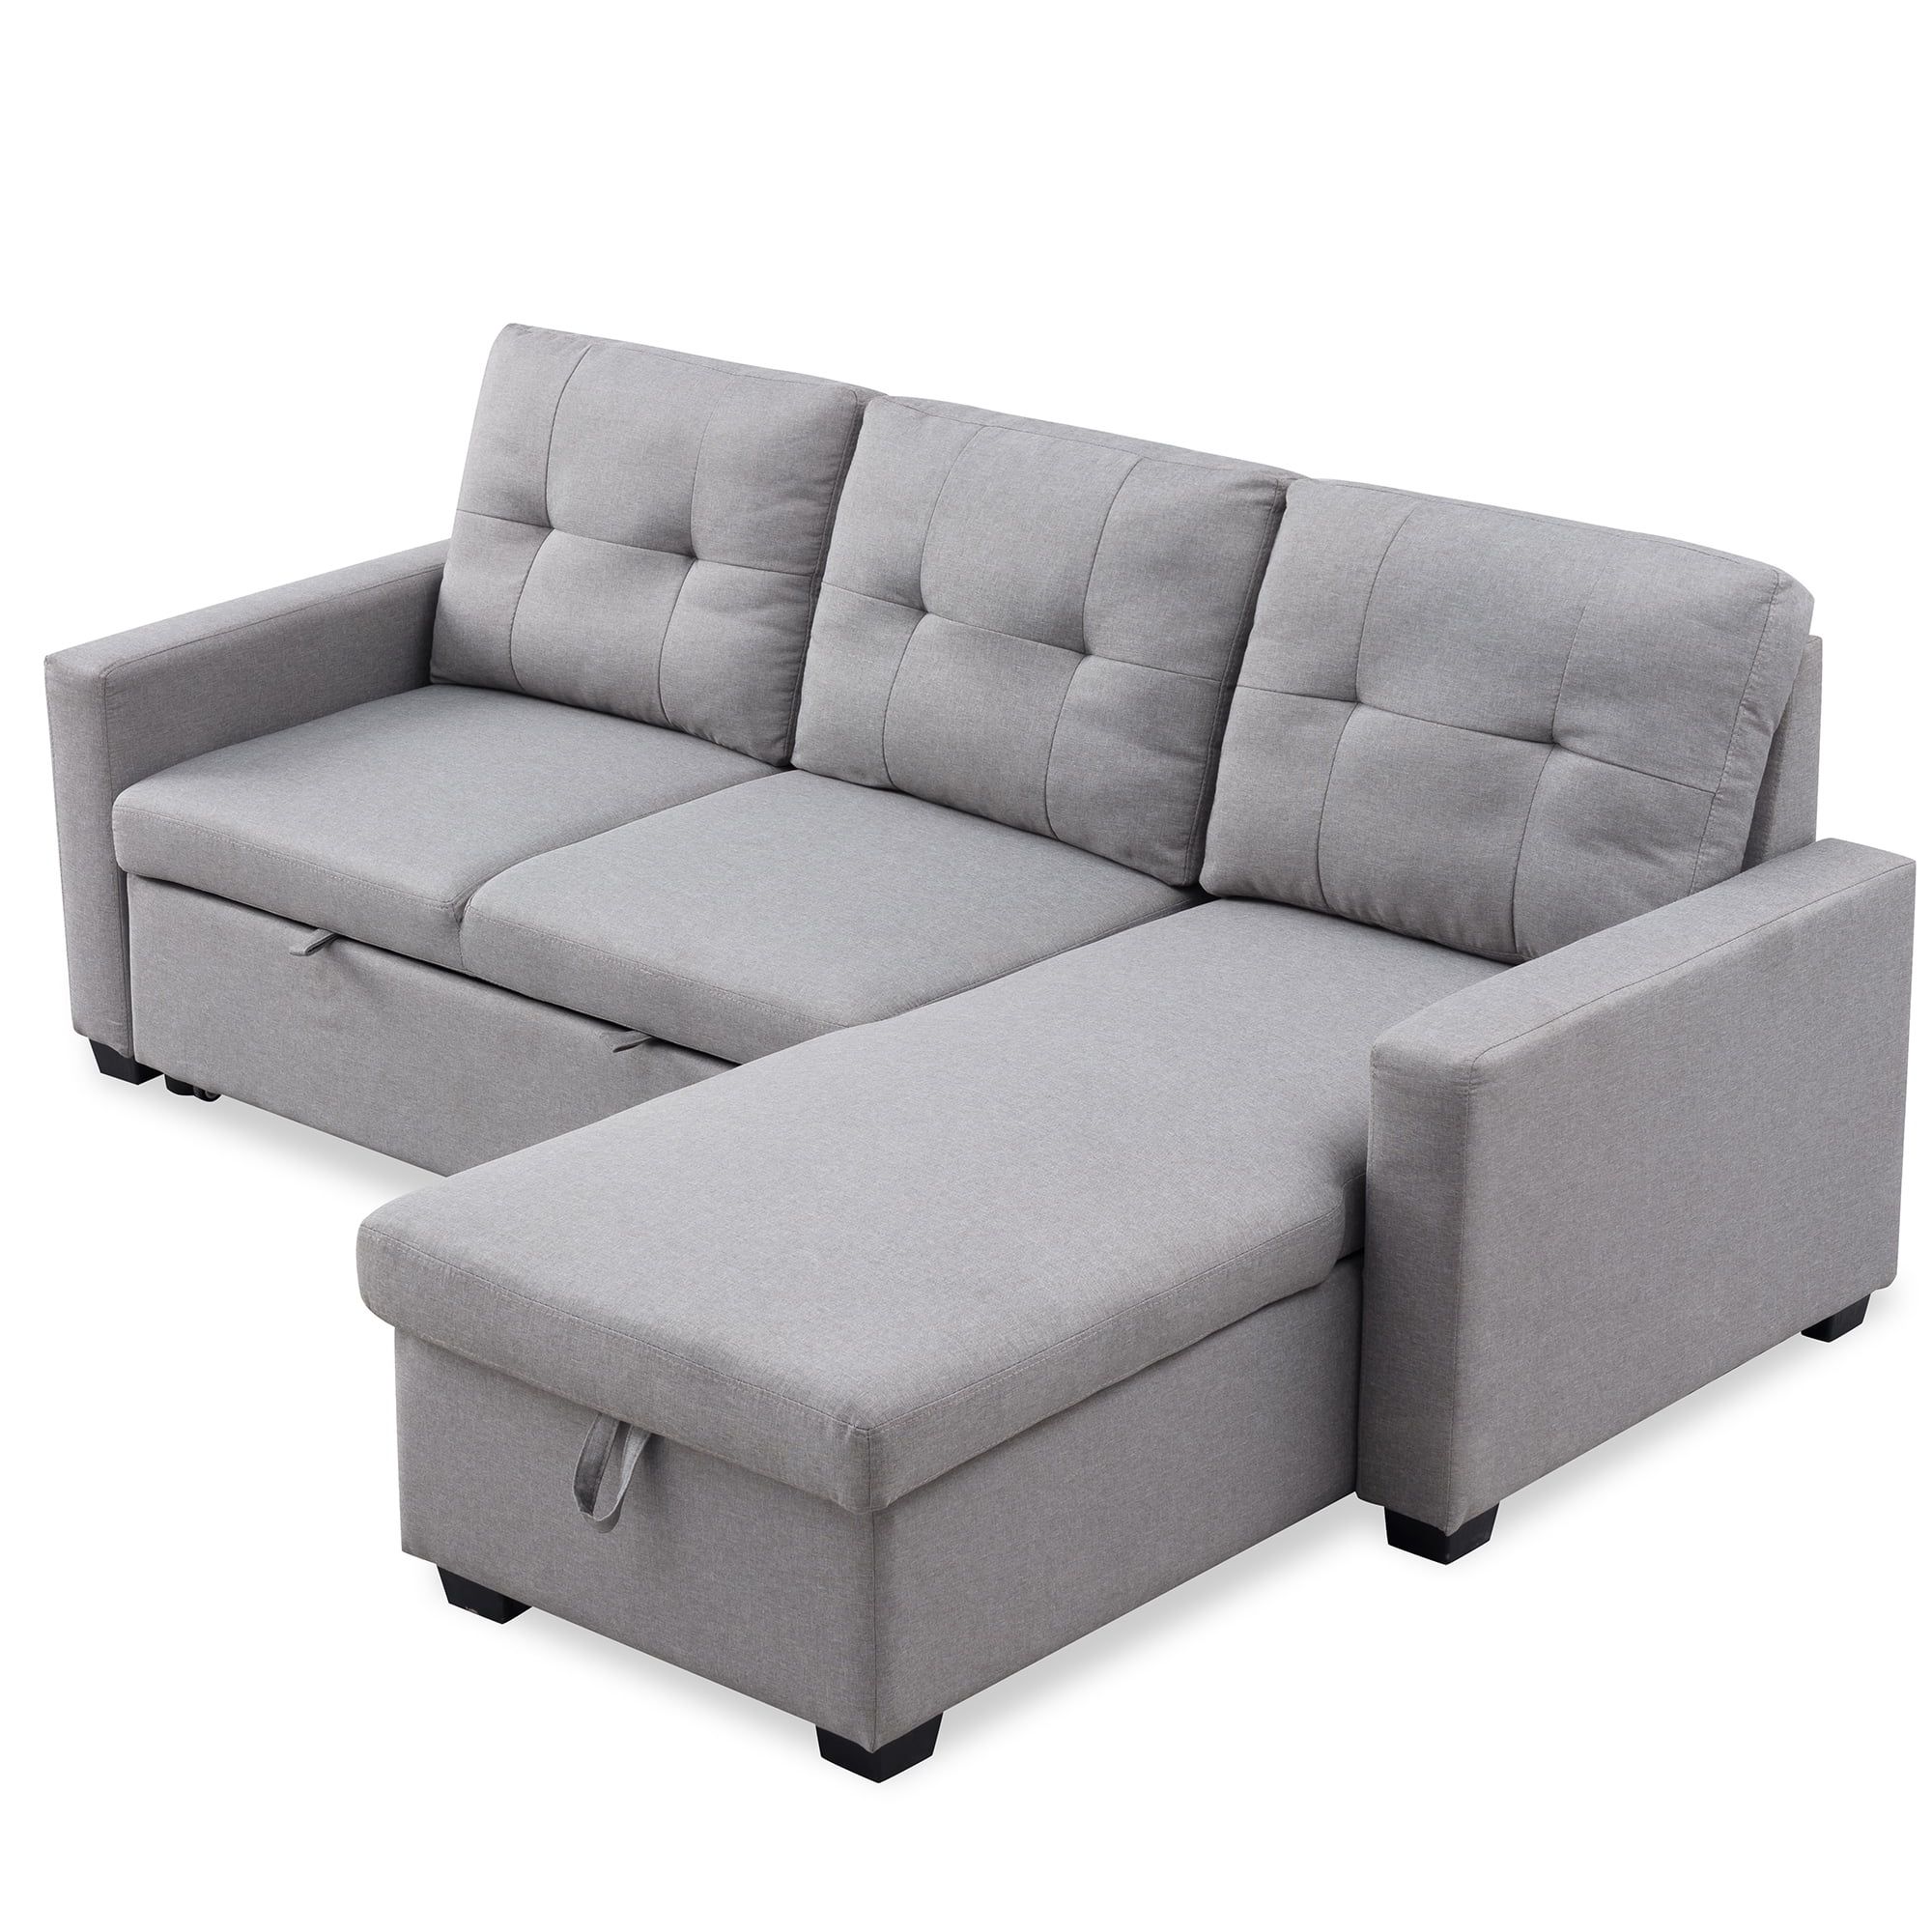 Mid Century Sectional Sofa With Pull Out Sleeper, 82" X 60" X 35 Pertaining To 3 In 1 Gray Pull Out Sleeper Sofas (View 13 of 20)